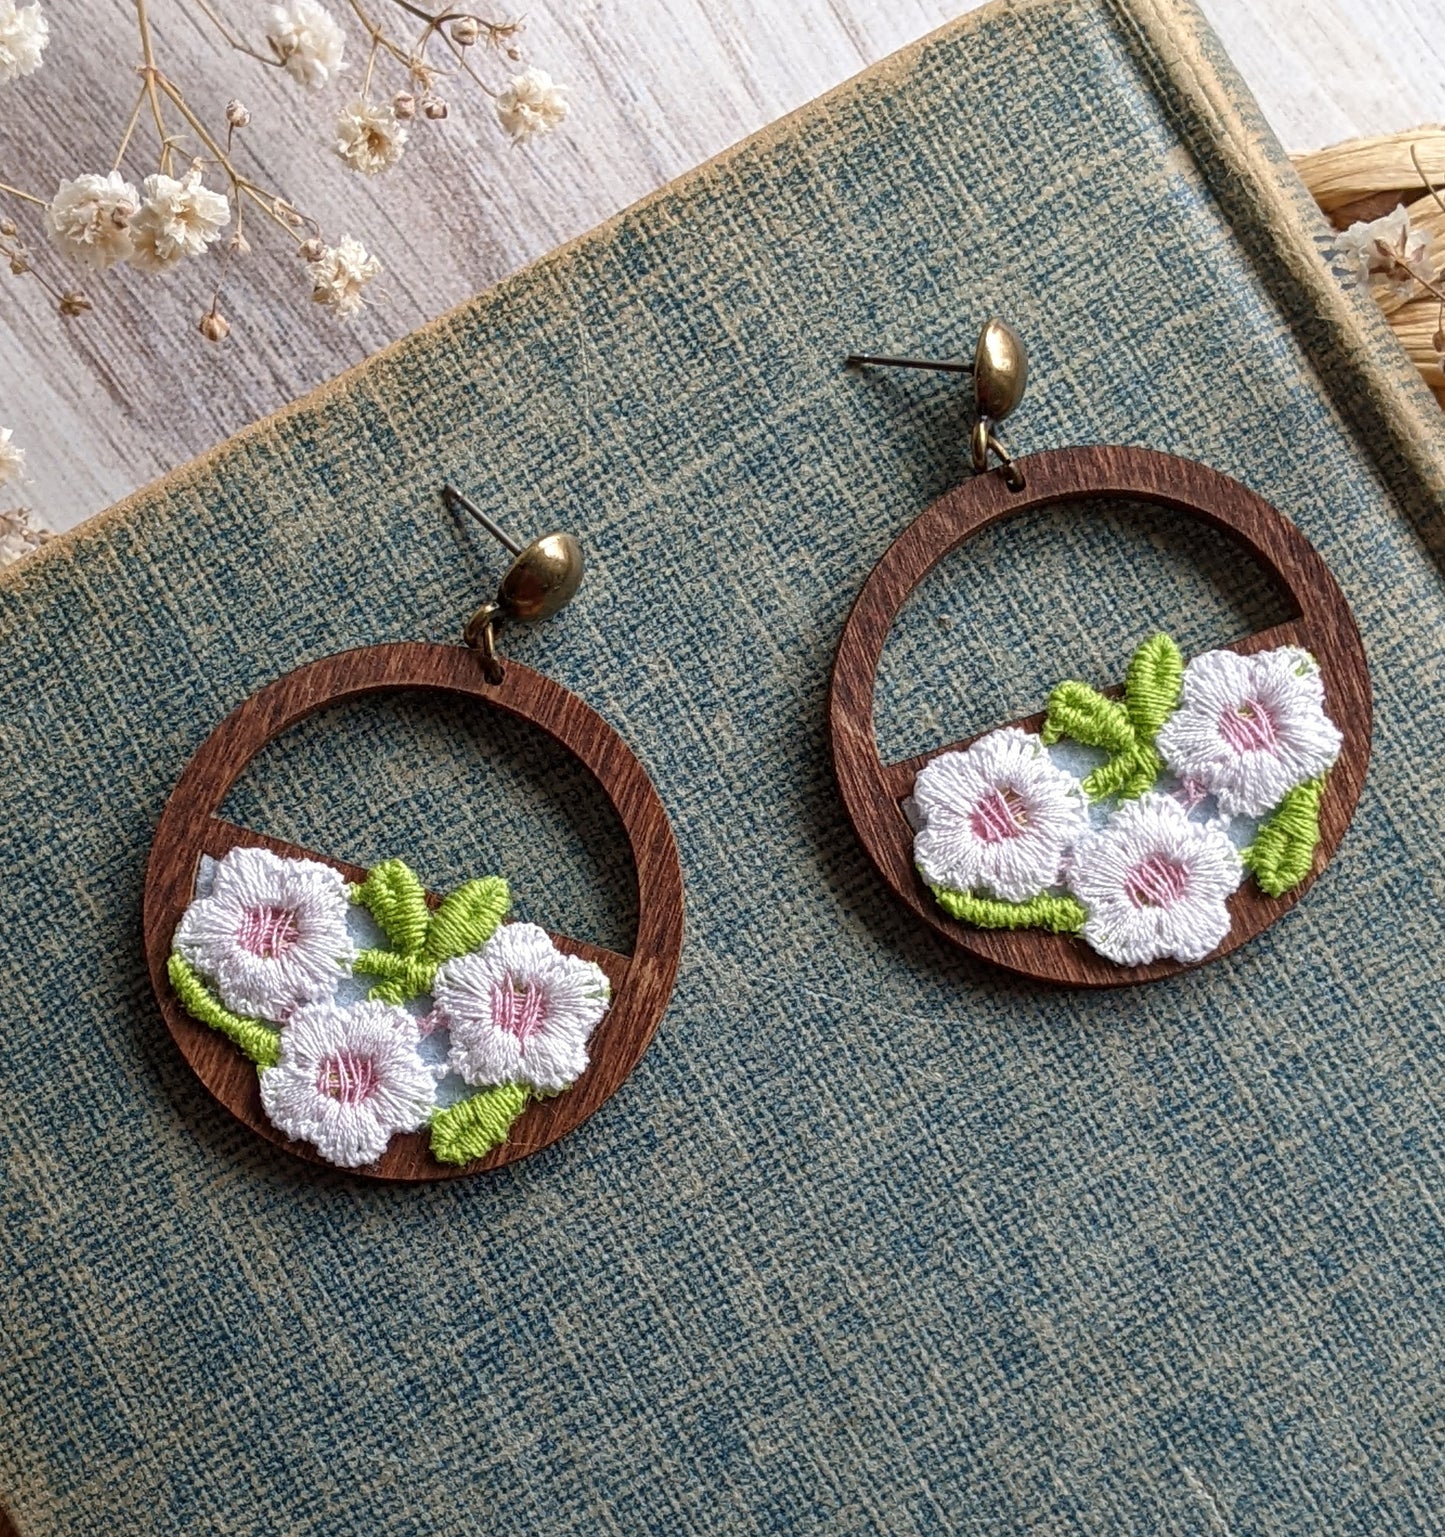 1970s Fabric Daisy Earrings - White, Pink, Green